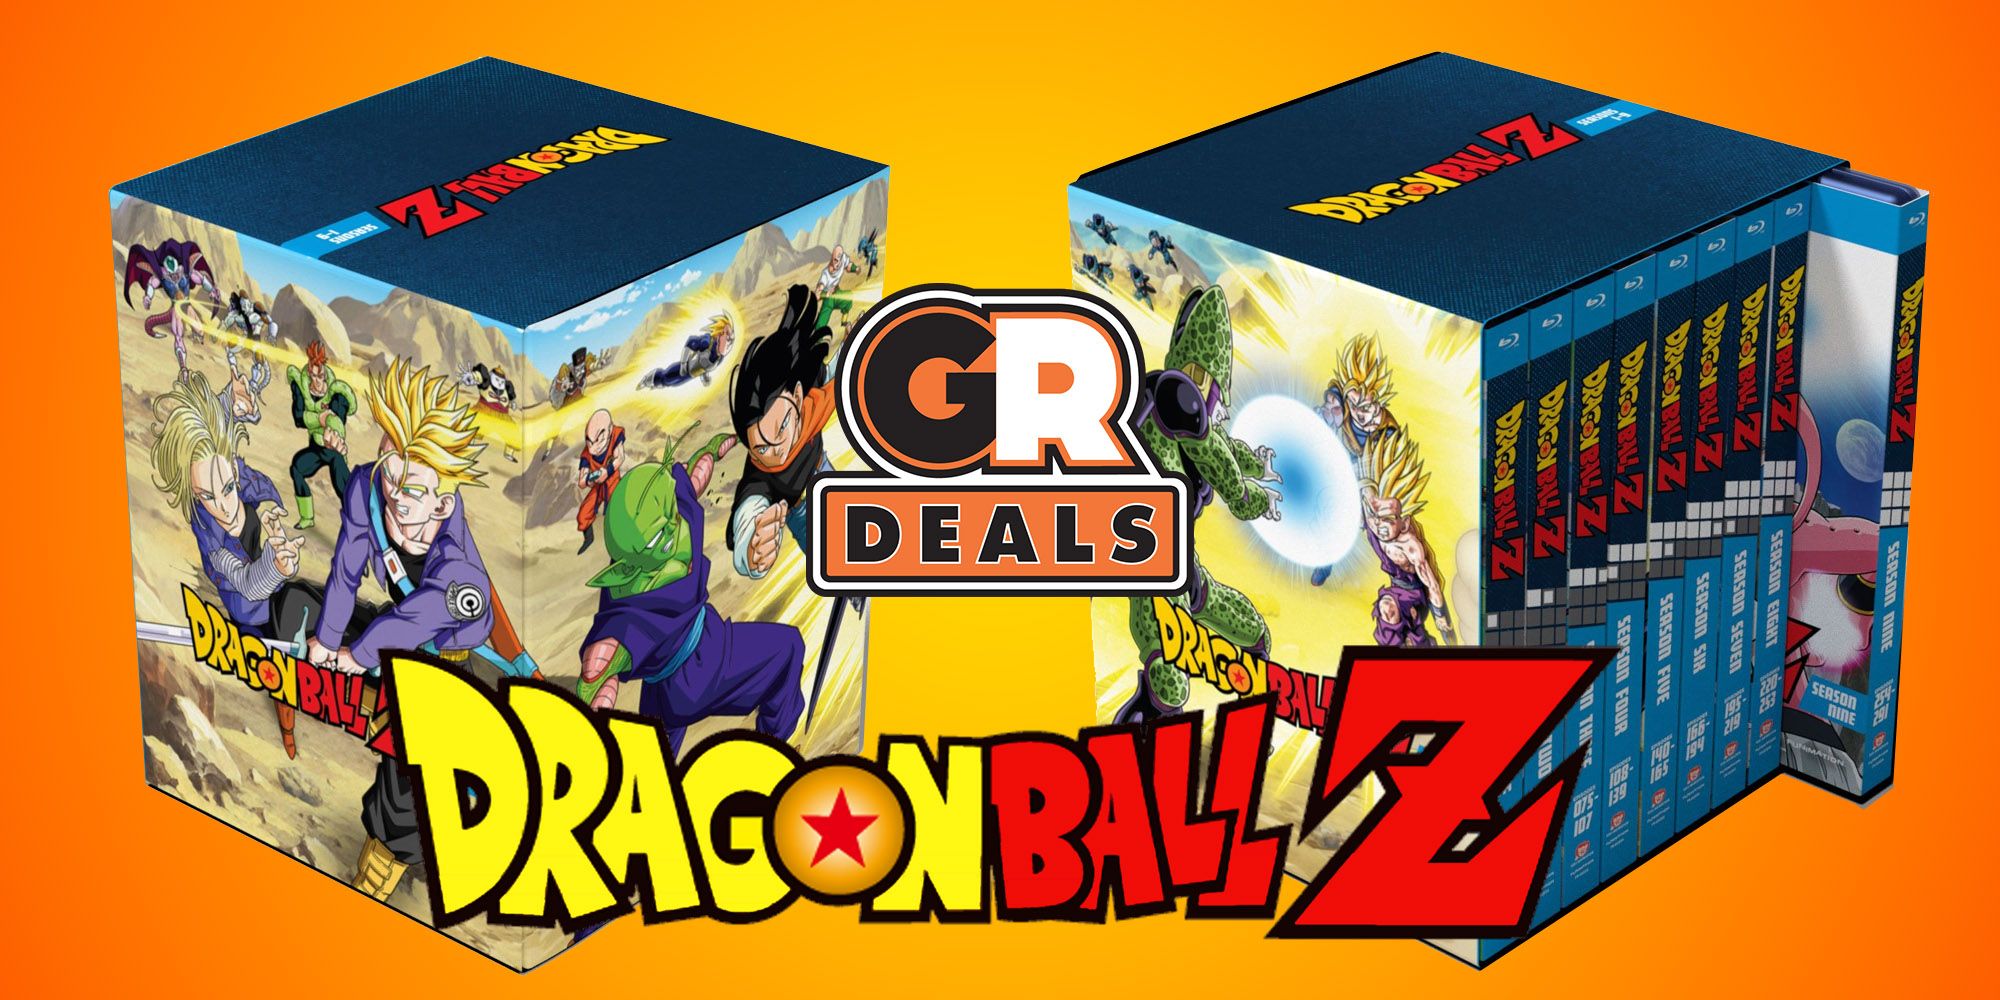 Dragon Ball Z Complete Collection Blu-ray on sale